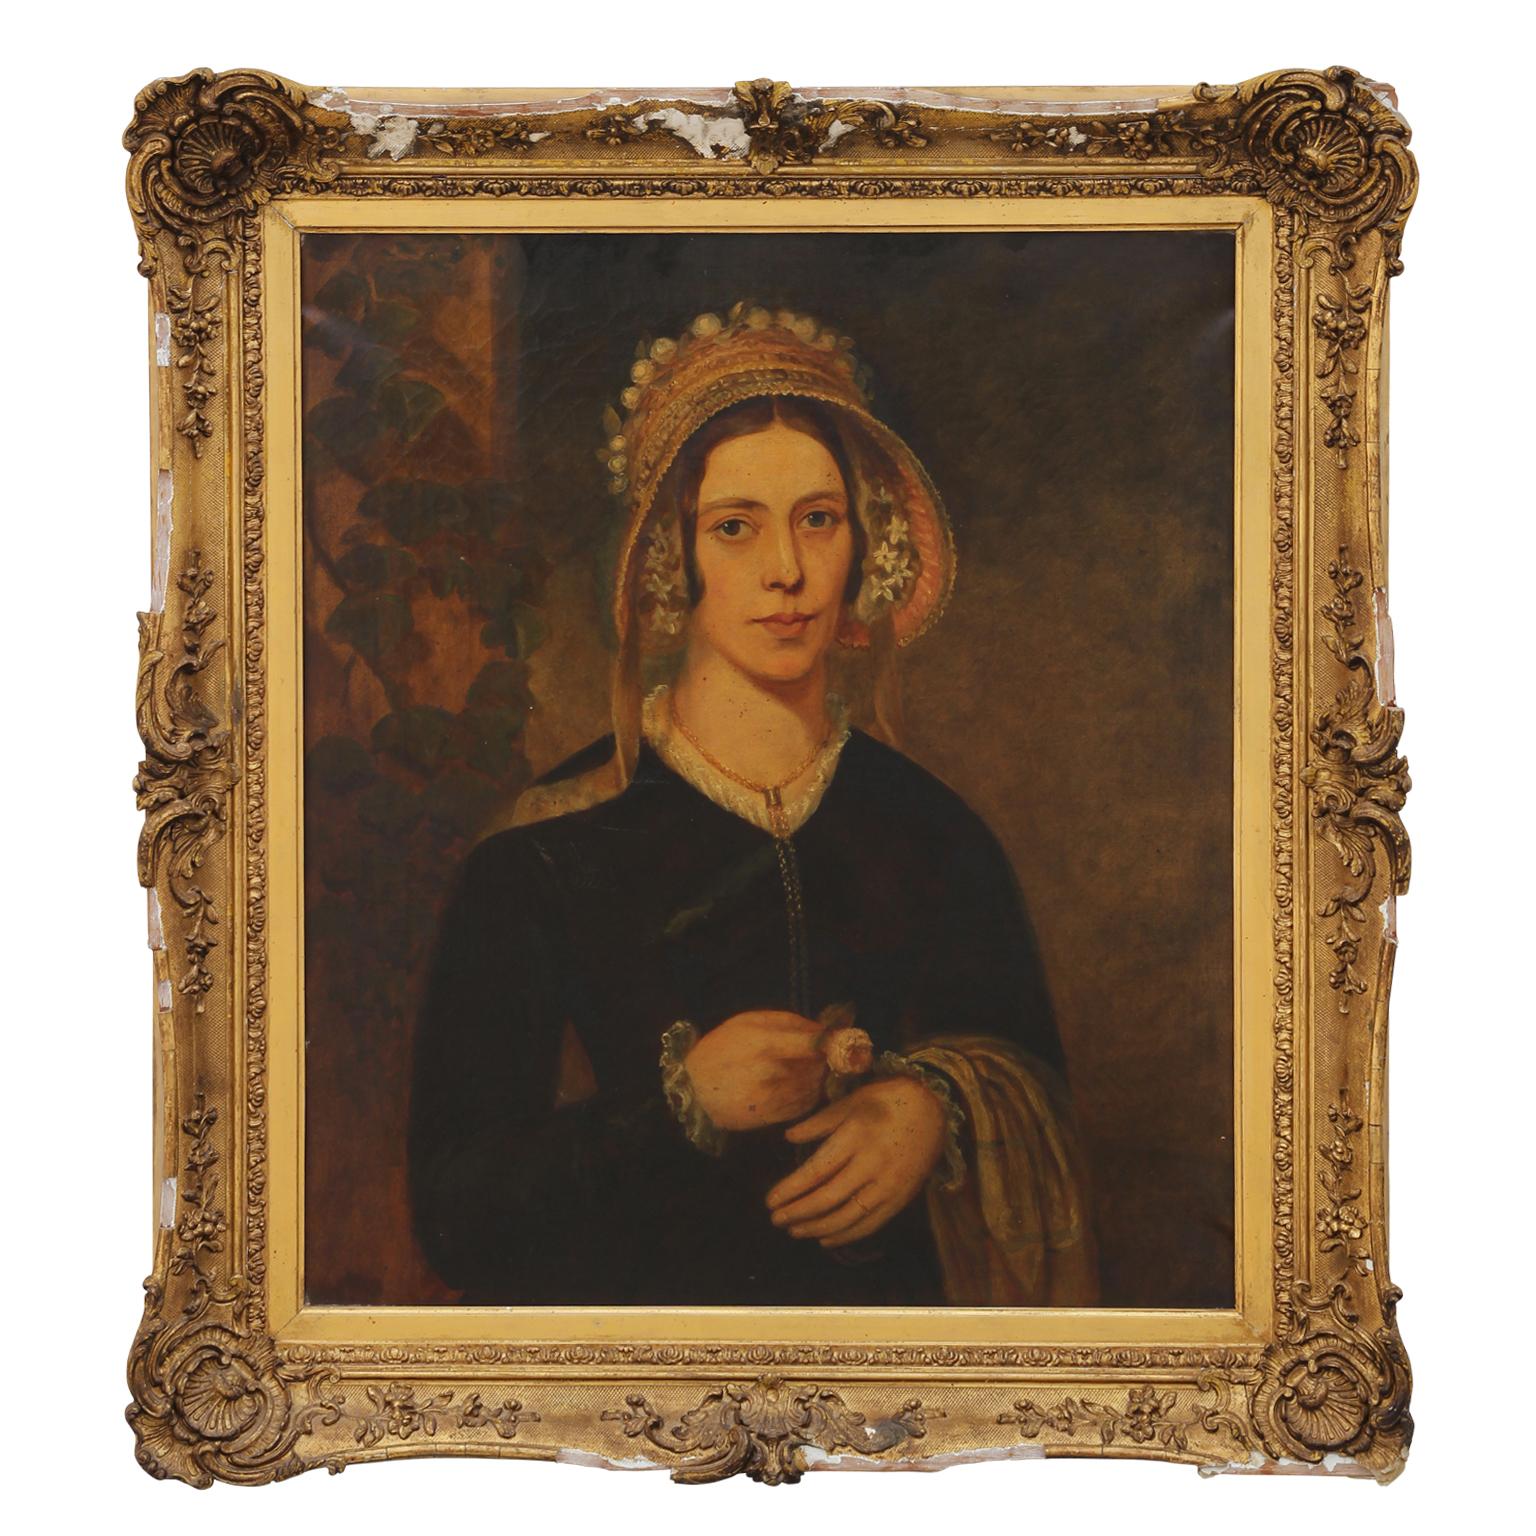 Unknown Figurative Painting - Early European Portrait Painting of a Young Woman